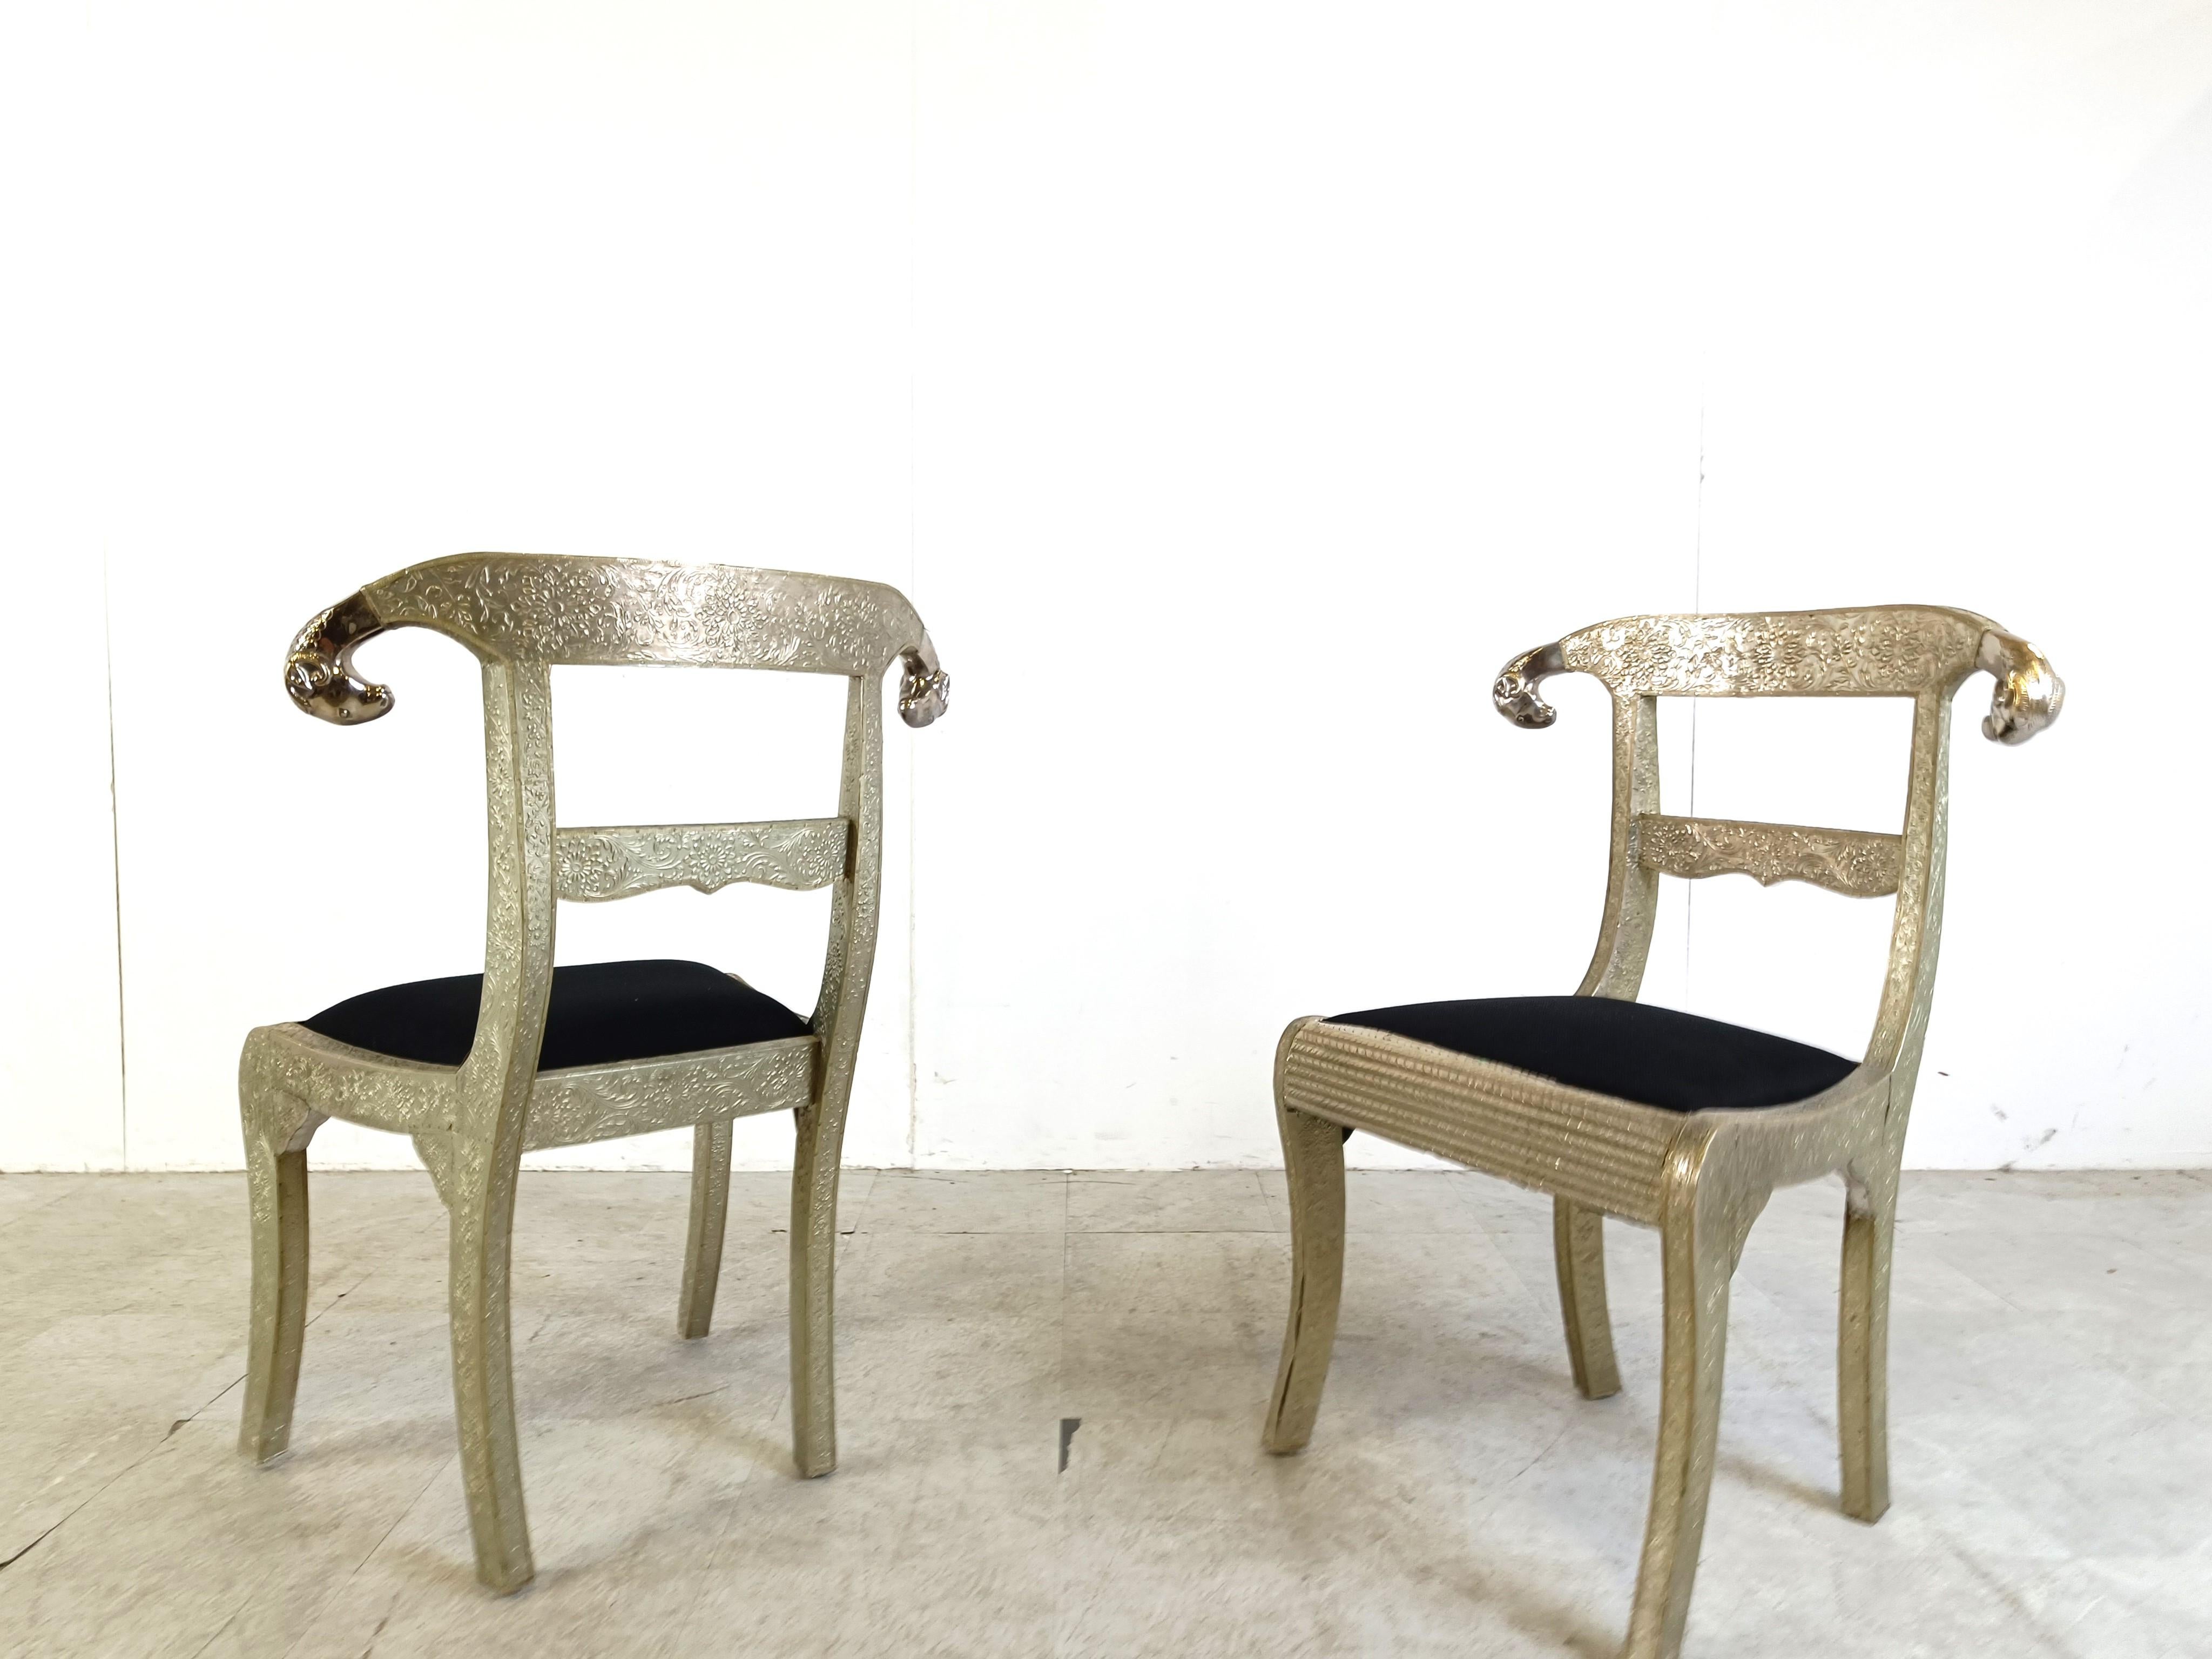 Anglo-Indian silvered dowry chairs, 1950s For Sale 2